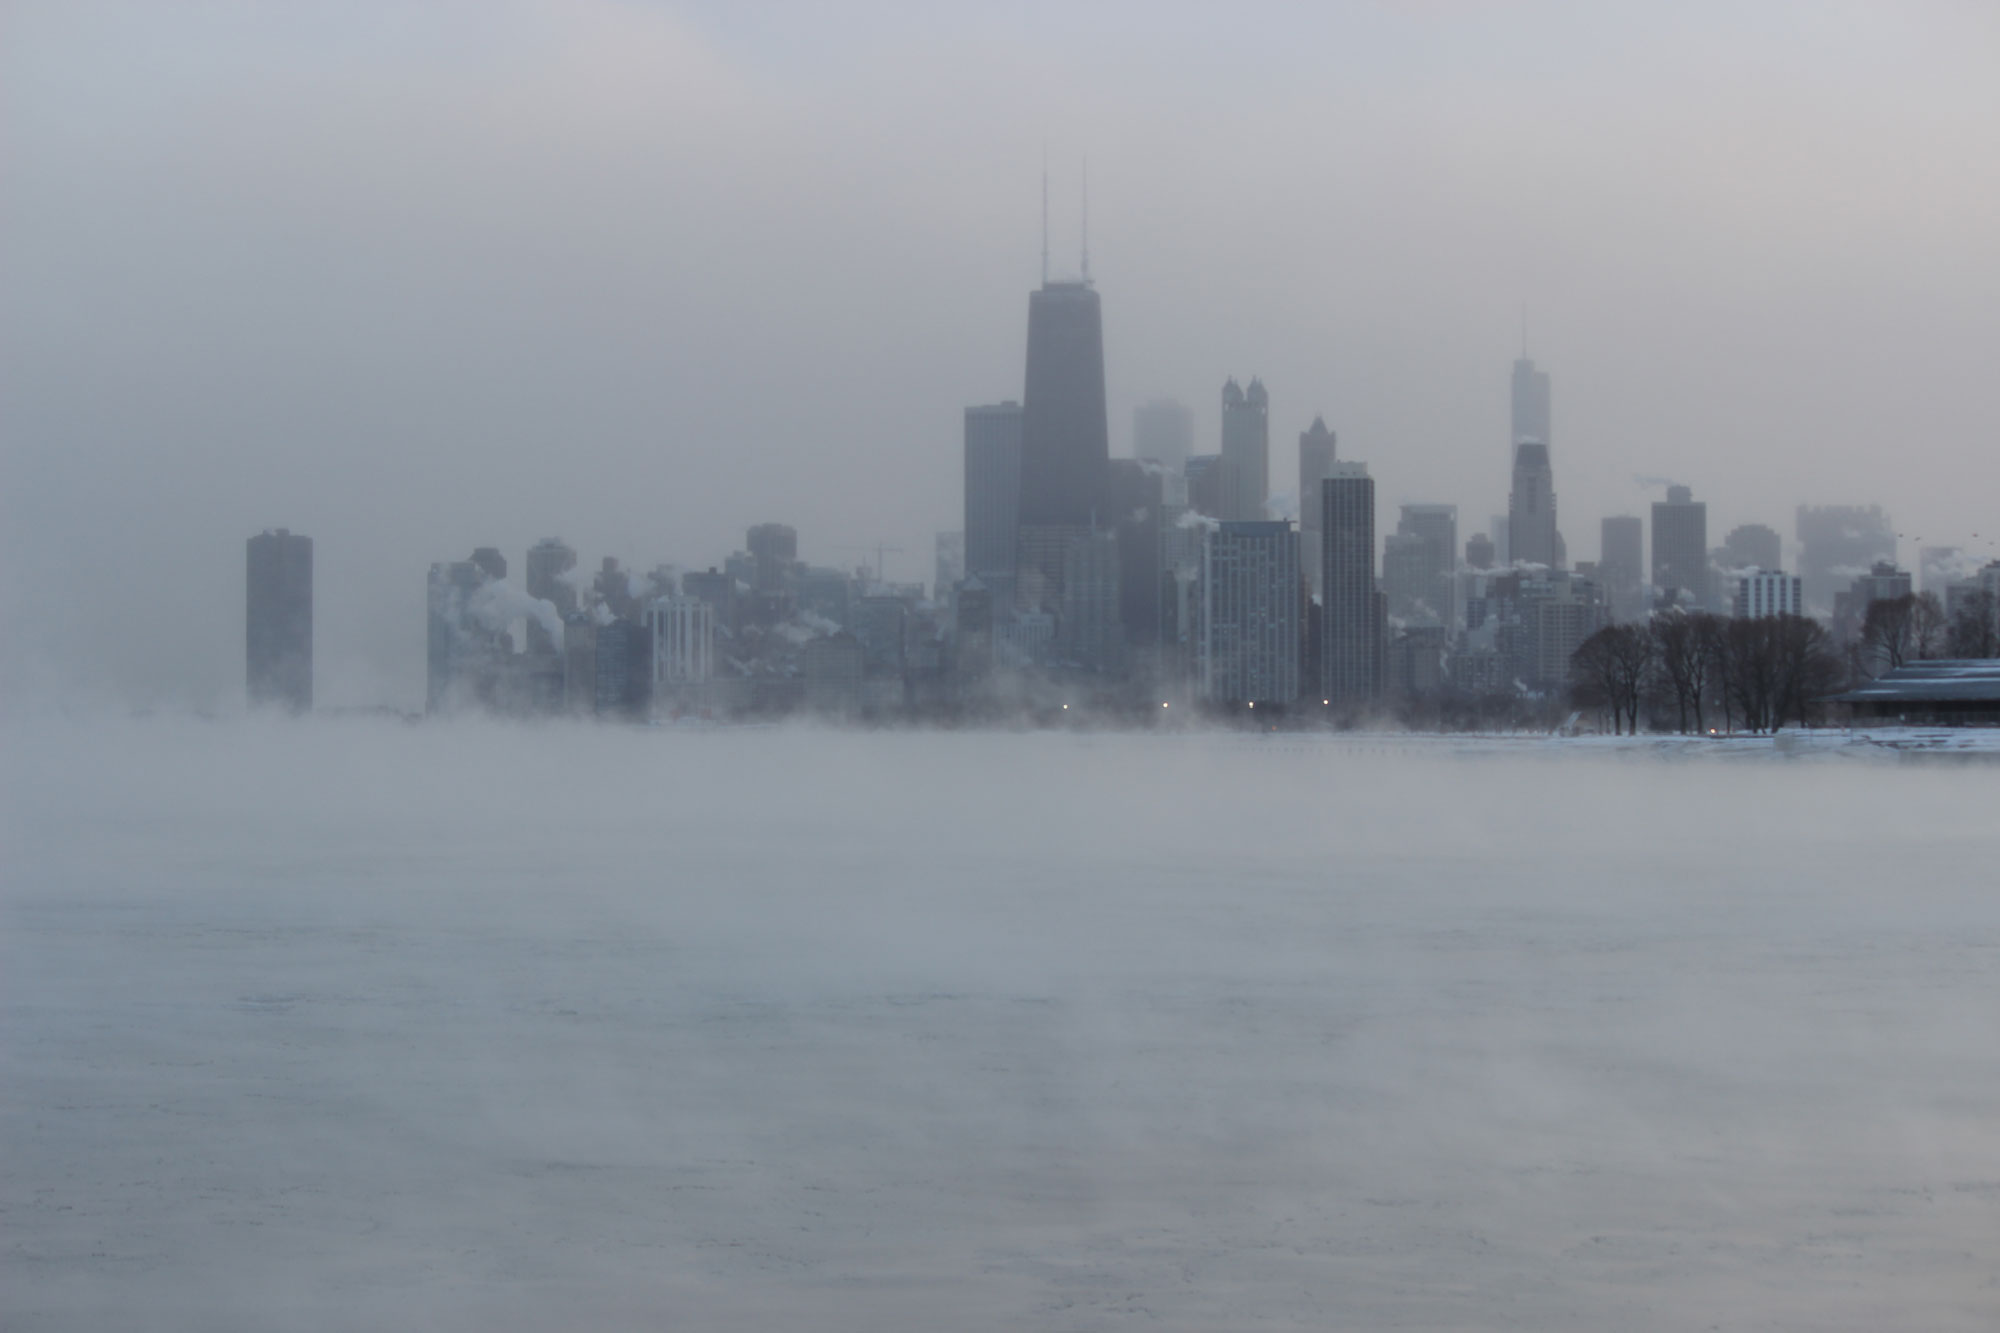 Photograph of the skyline of Chicago with a frozen Lake Michigan in the foreground during a polar vortex.